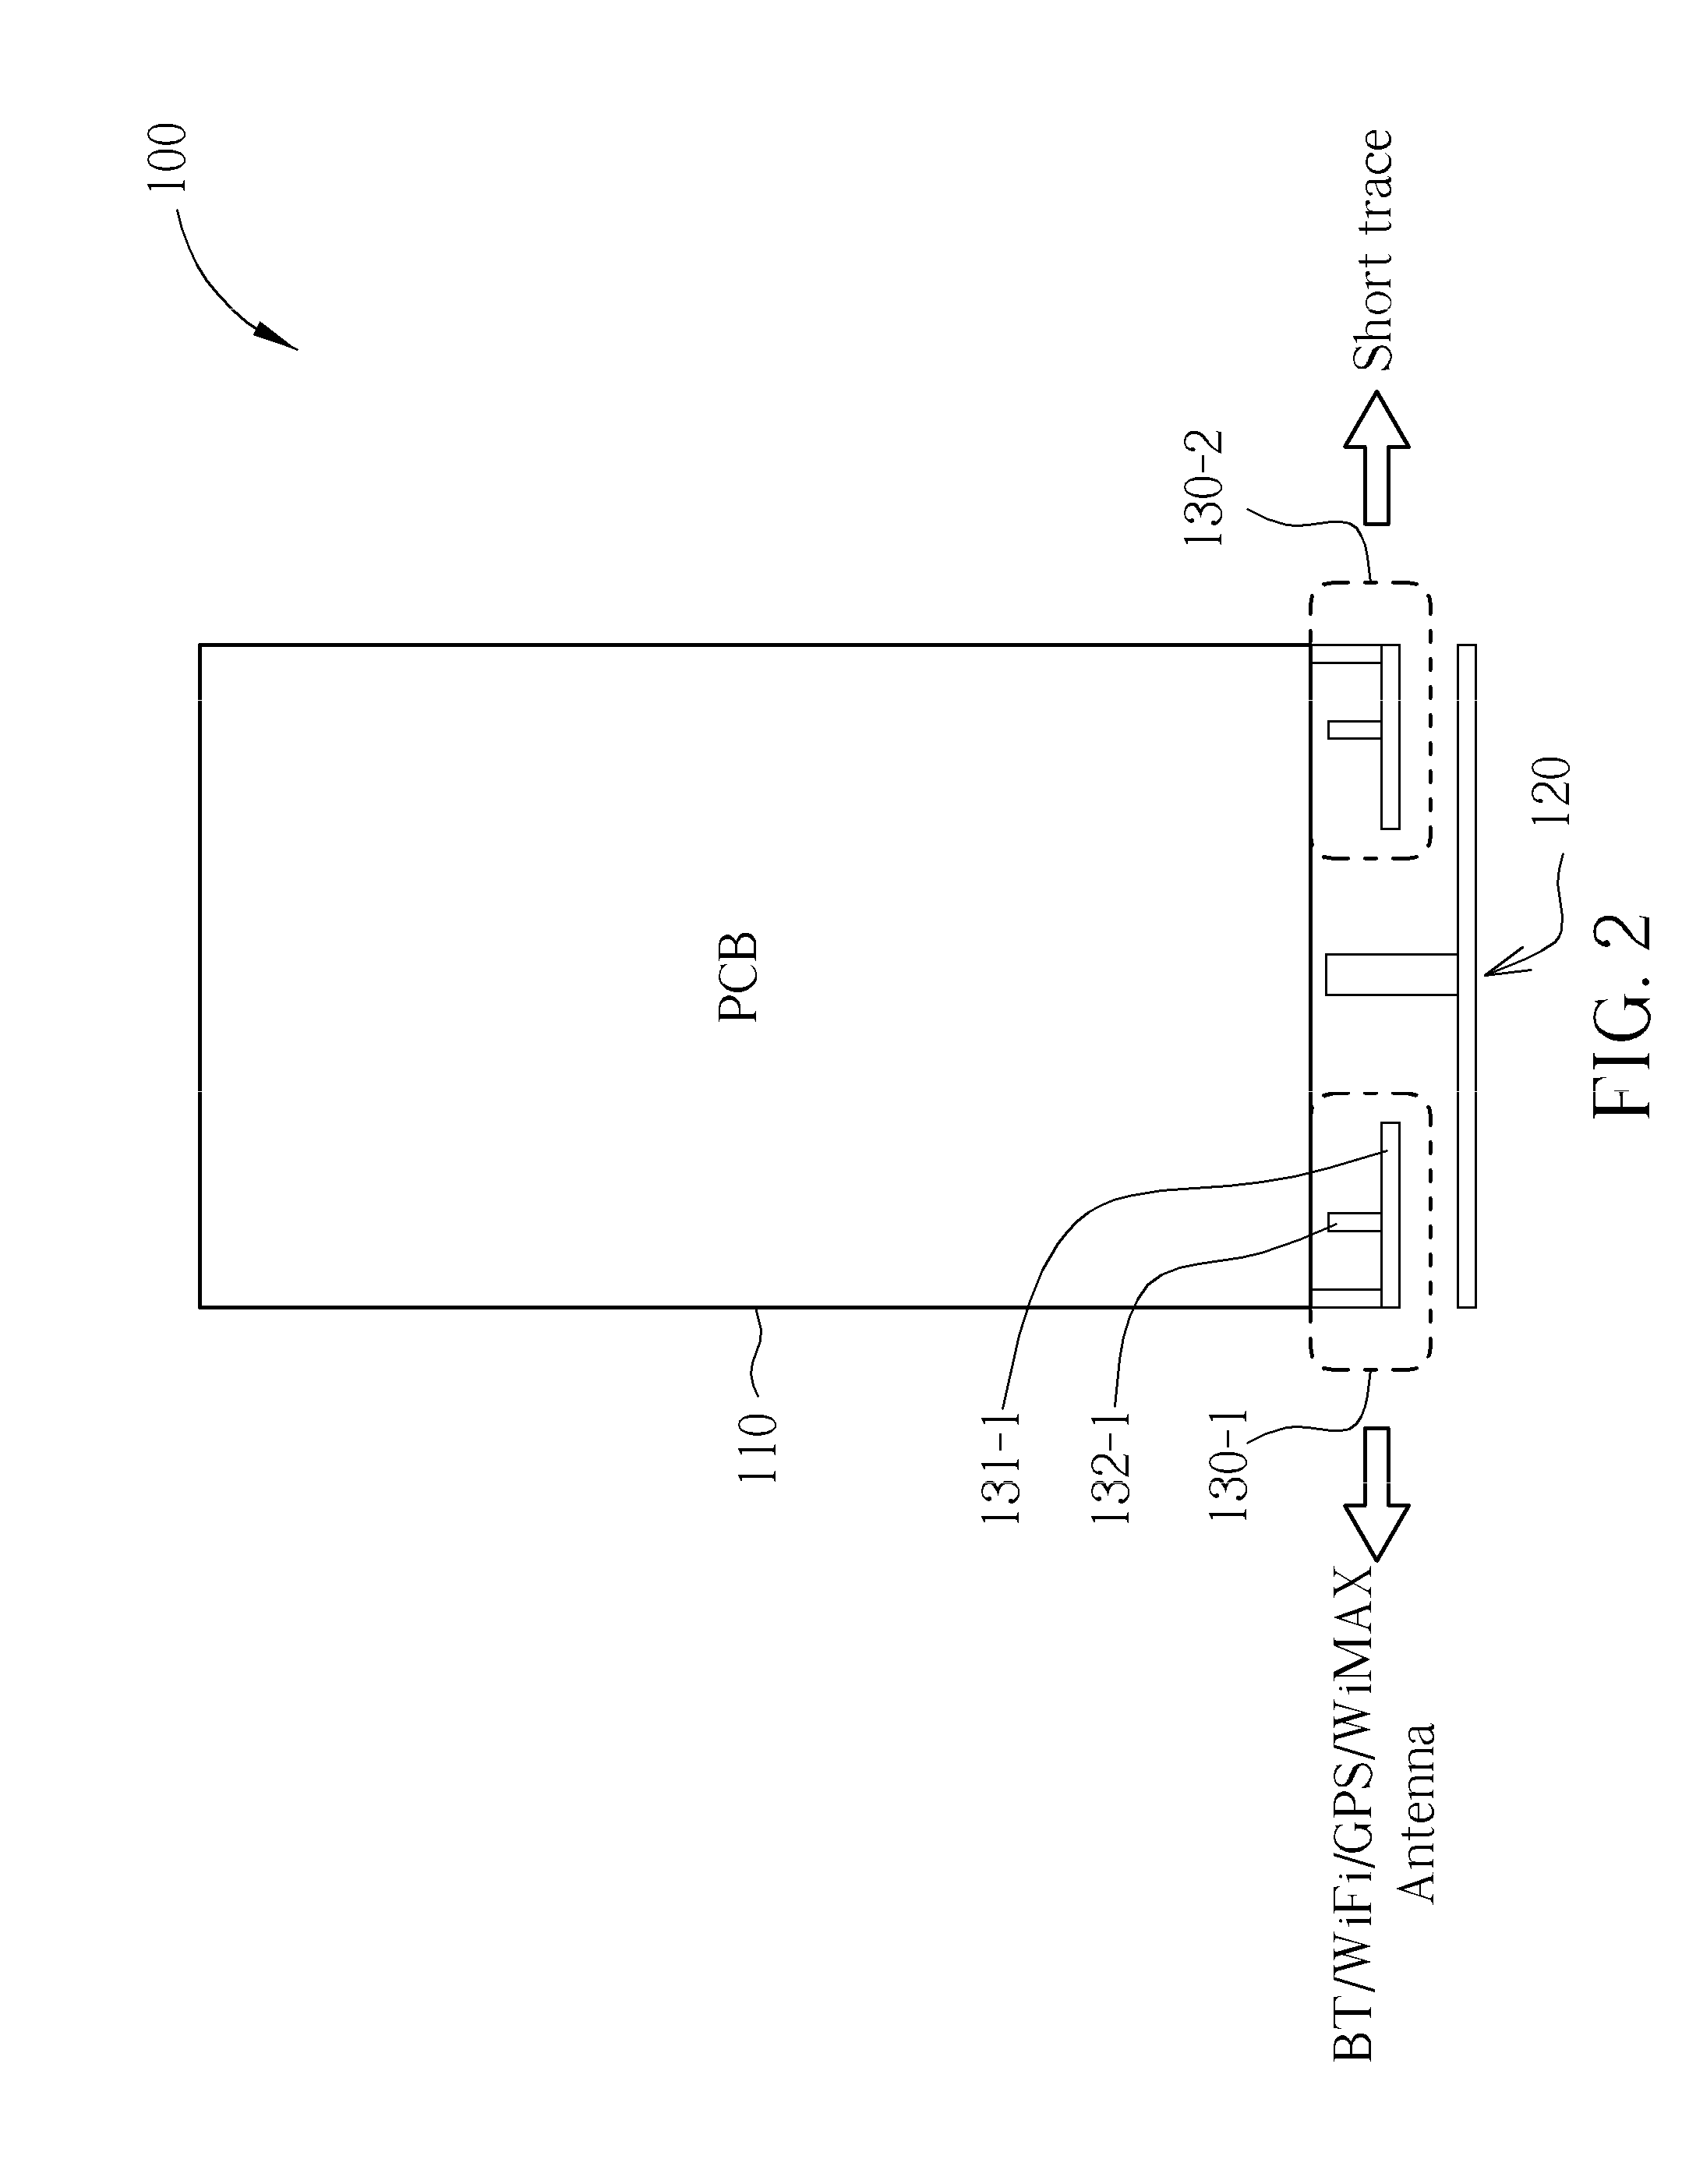 Apparatus for controlling electric field distribution by utilizing short trace structures